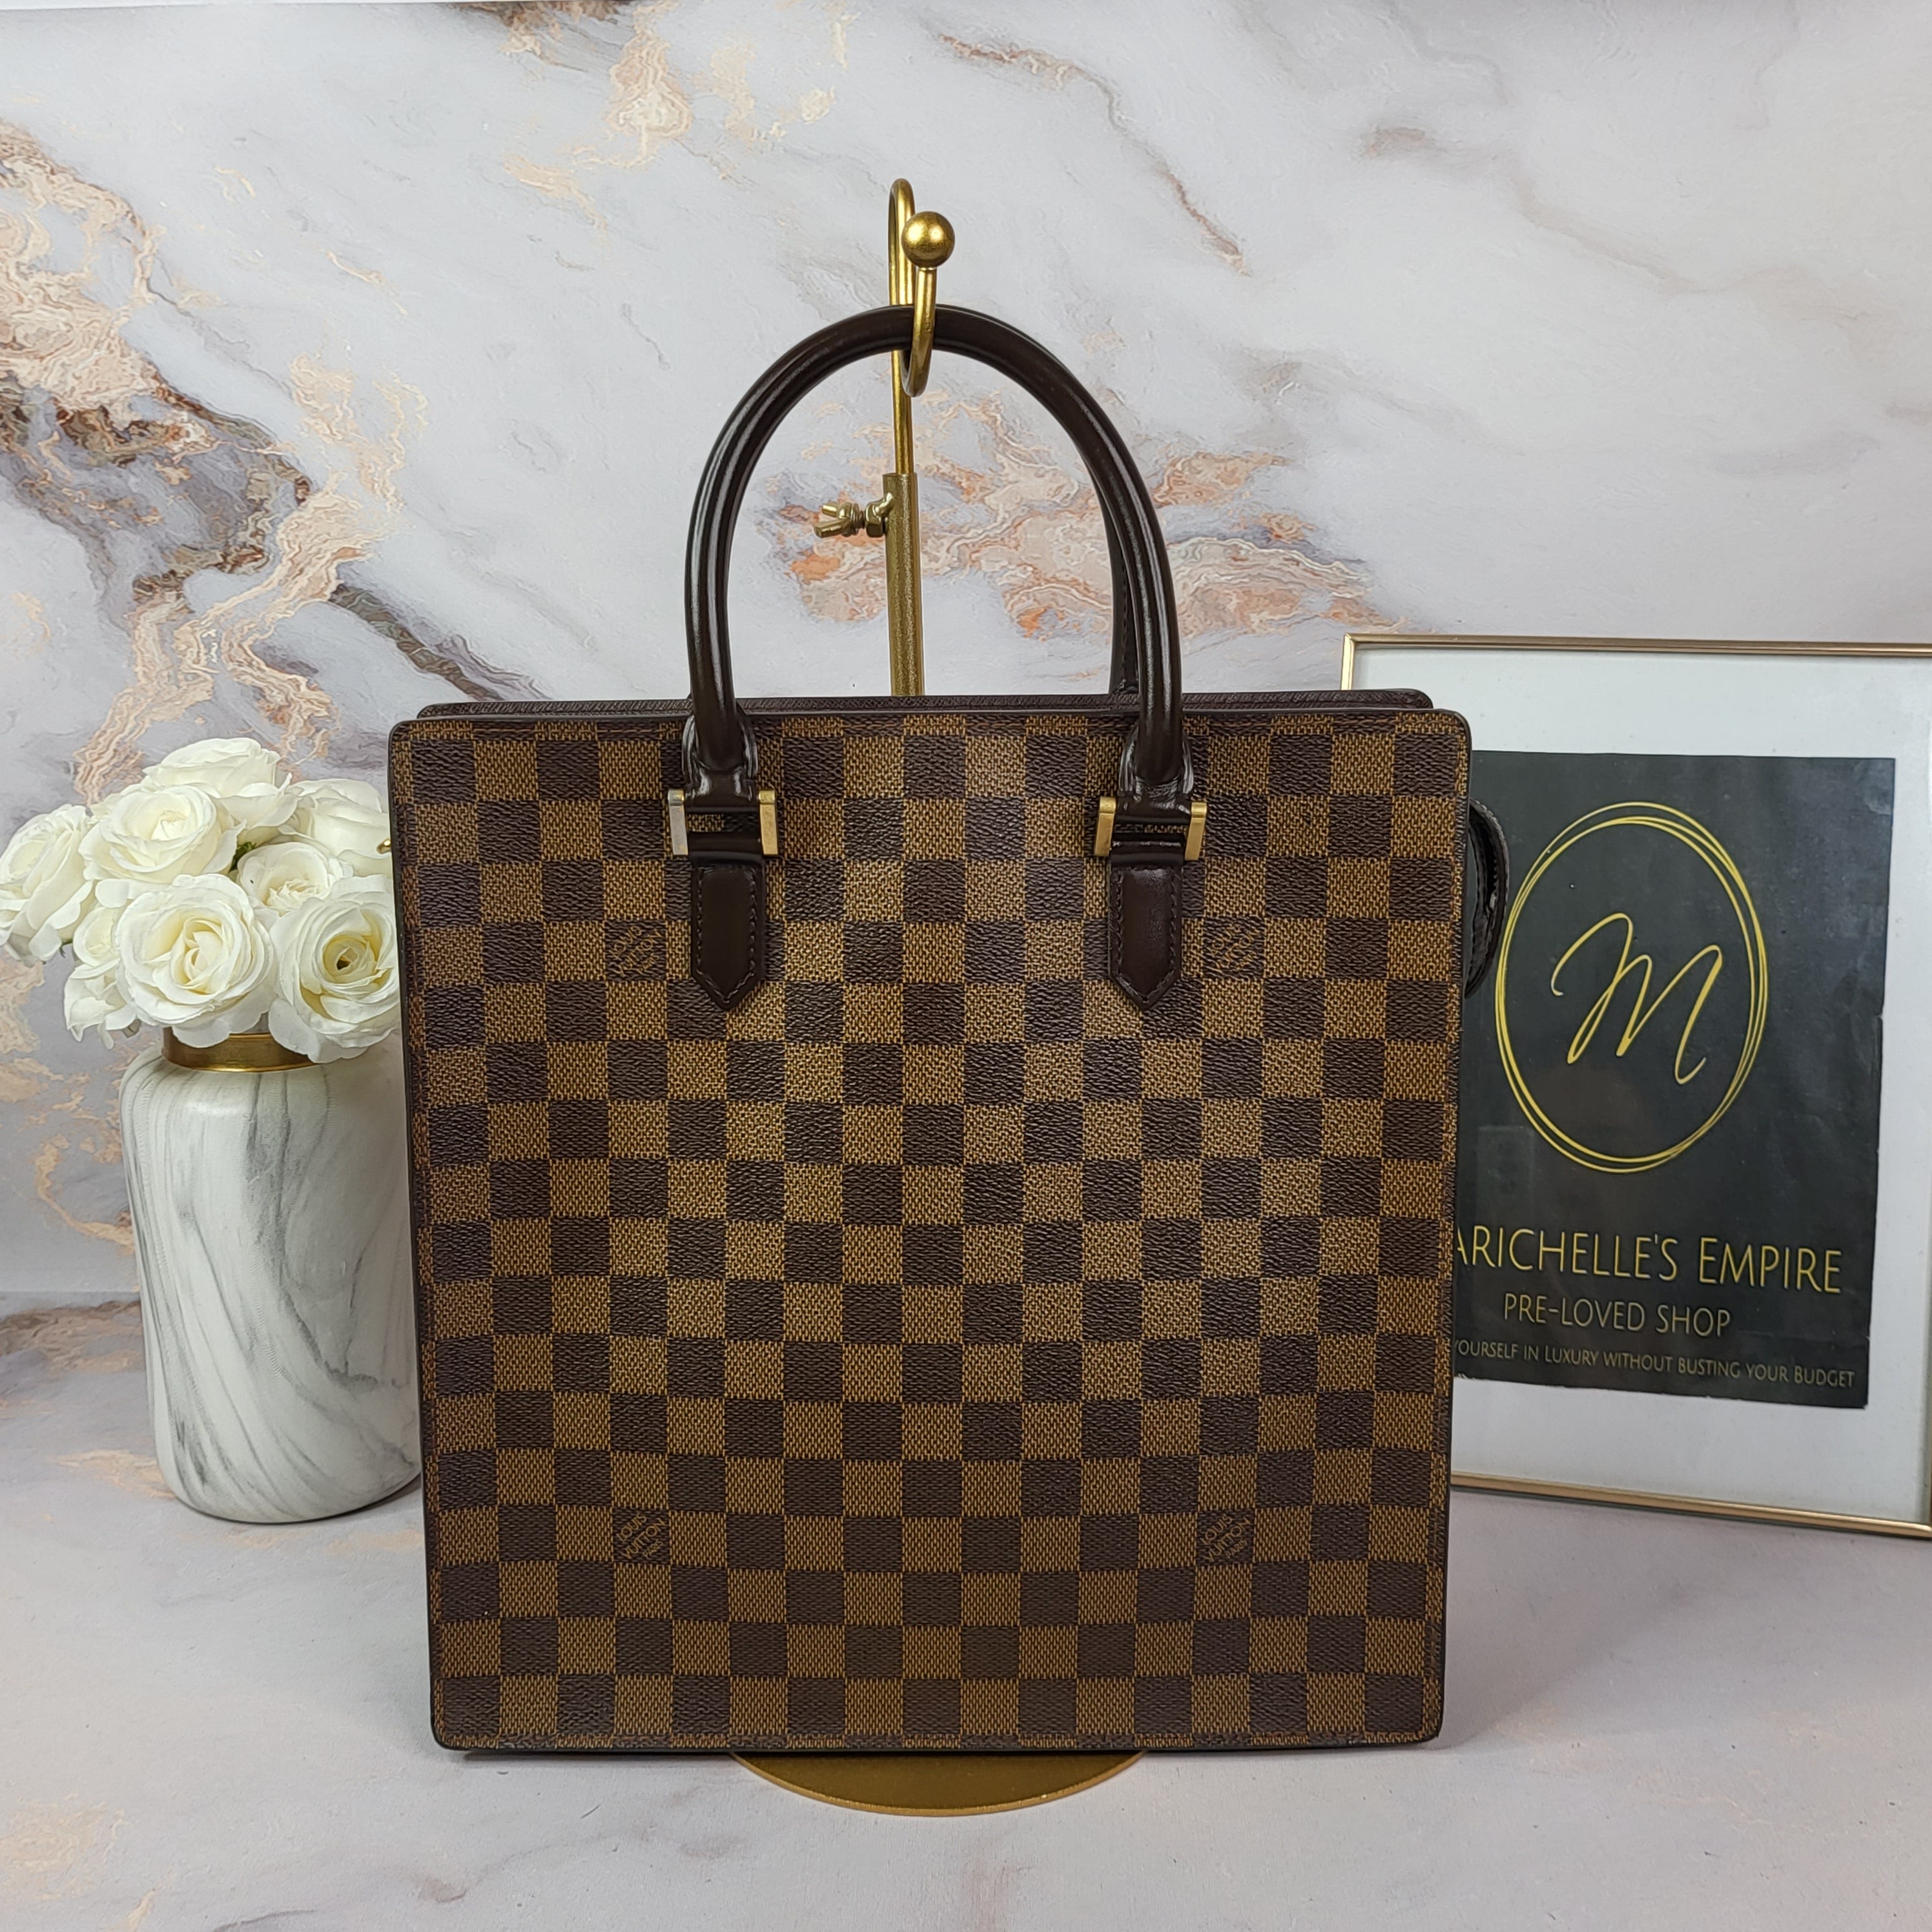 WHAT'S IN MY BAG?, LOUIS VUITTON DAMIER EBENE VENICE PM